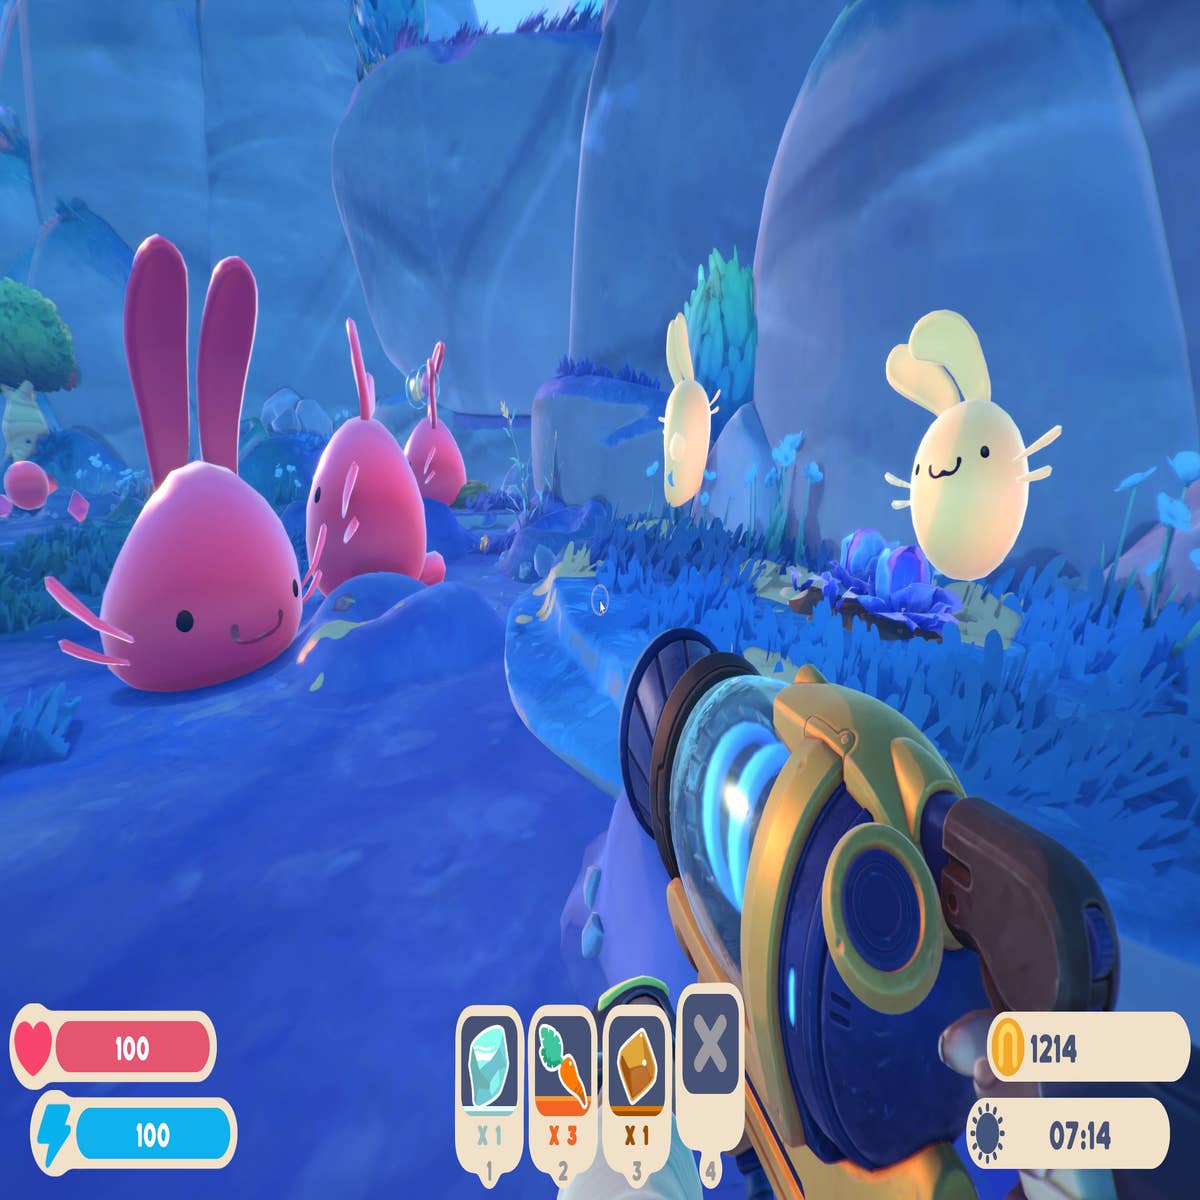 Heading back to the ranch with Slime Rancher 2 on Xbox